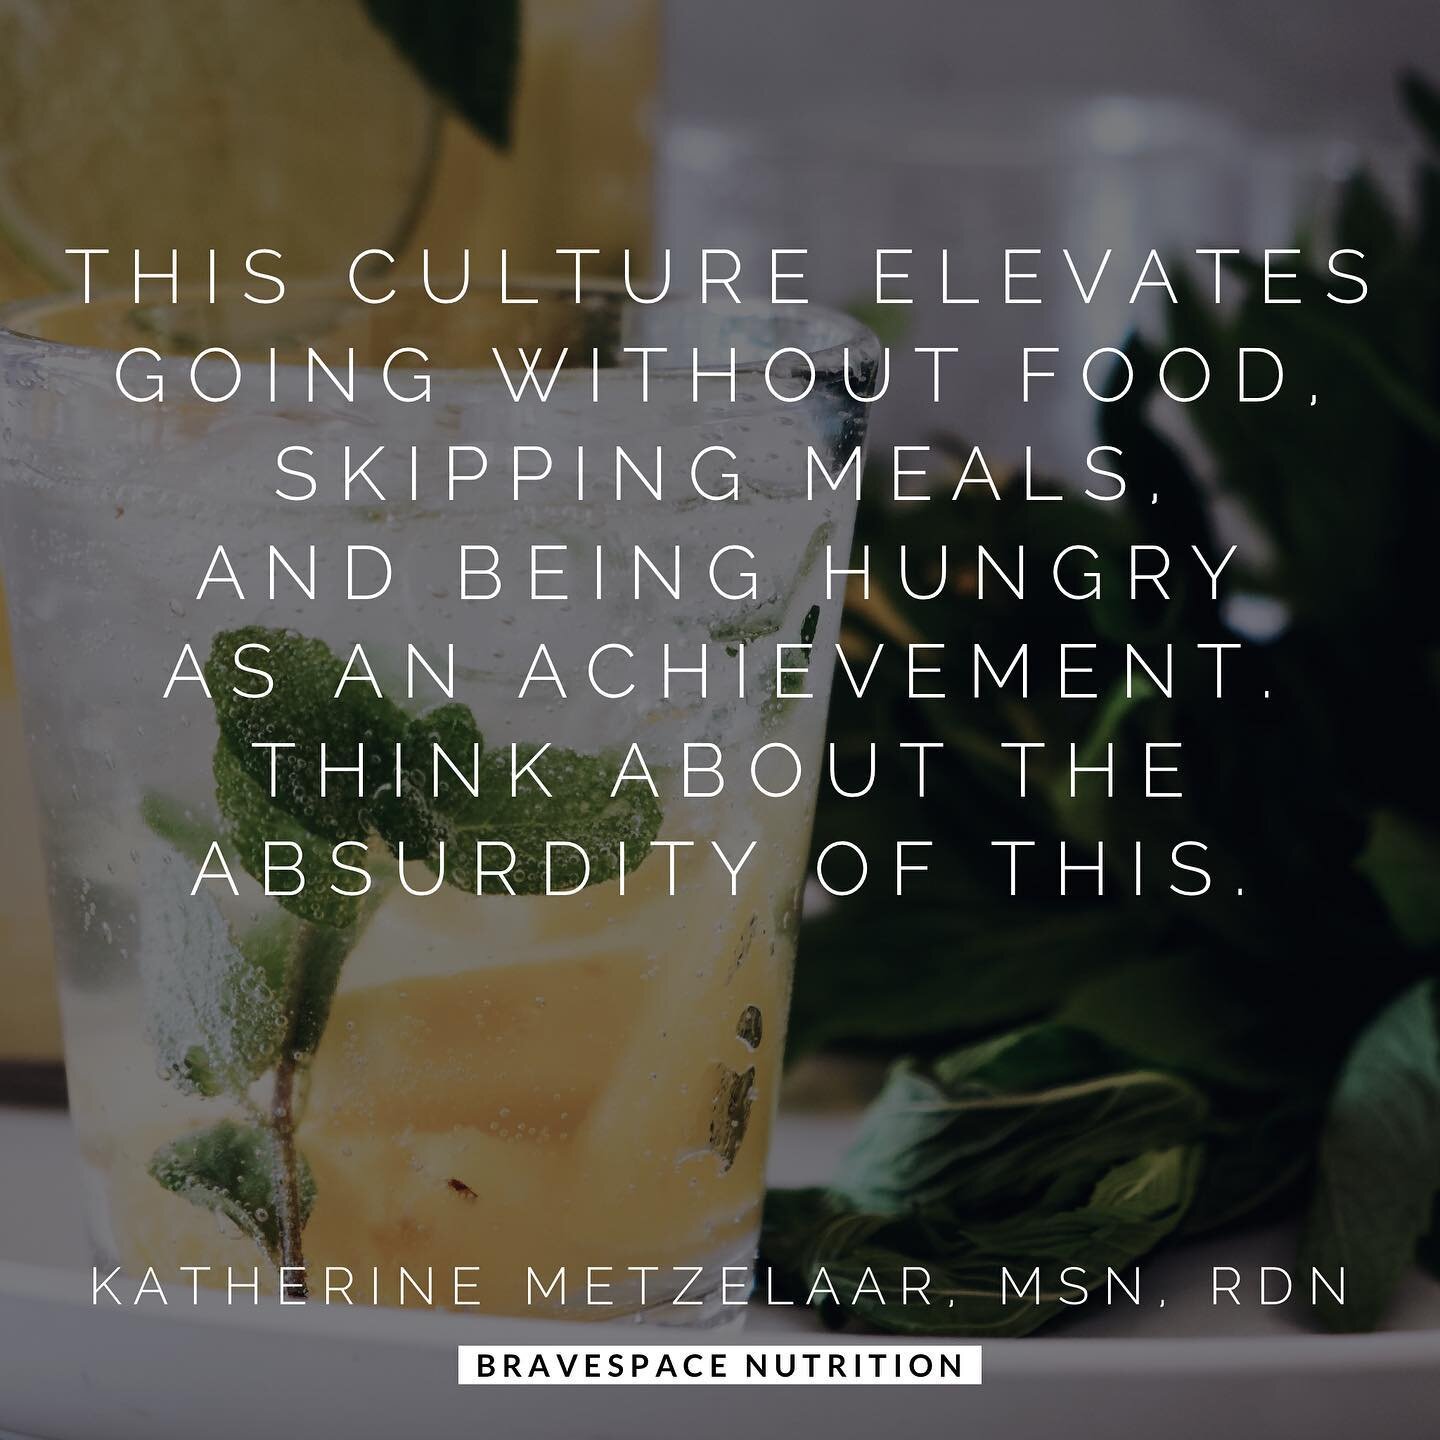 I often think of the absurdity of existing in a culture that elevates NOT eating as some kind of achievement. To deny food, your most basic and fundamental need as a human, is neither healthy nor sustainable despite what this diet culture says. ⁣
⁣
S